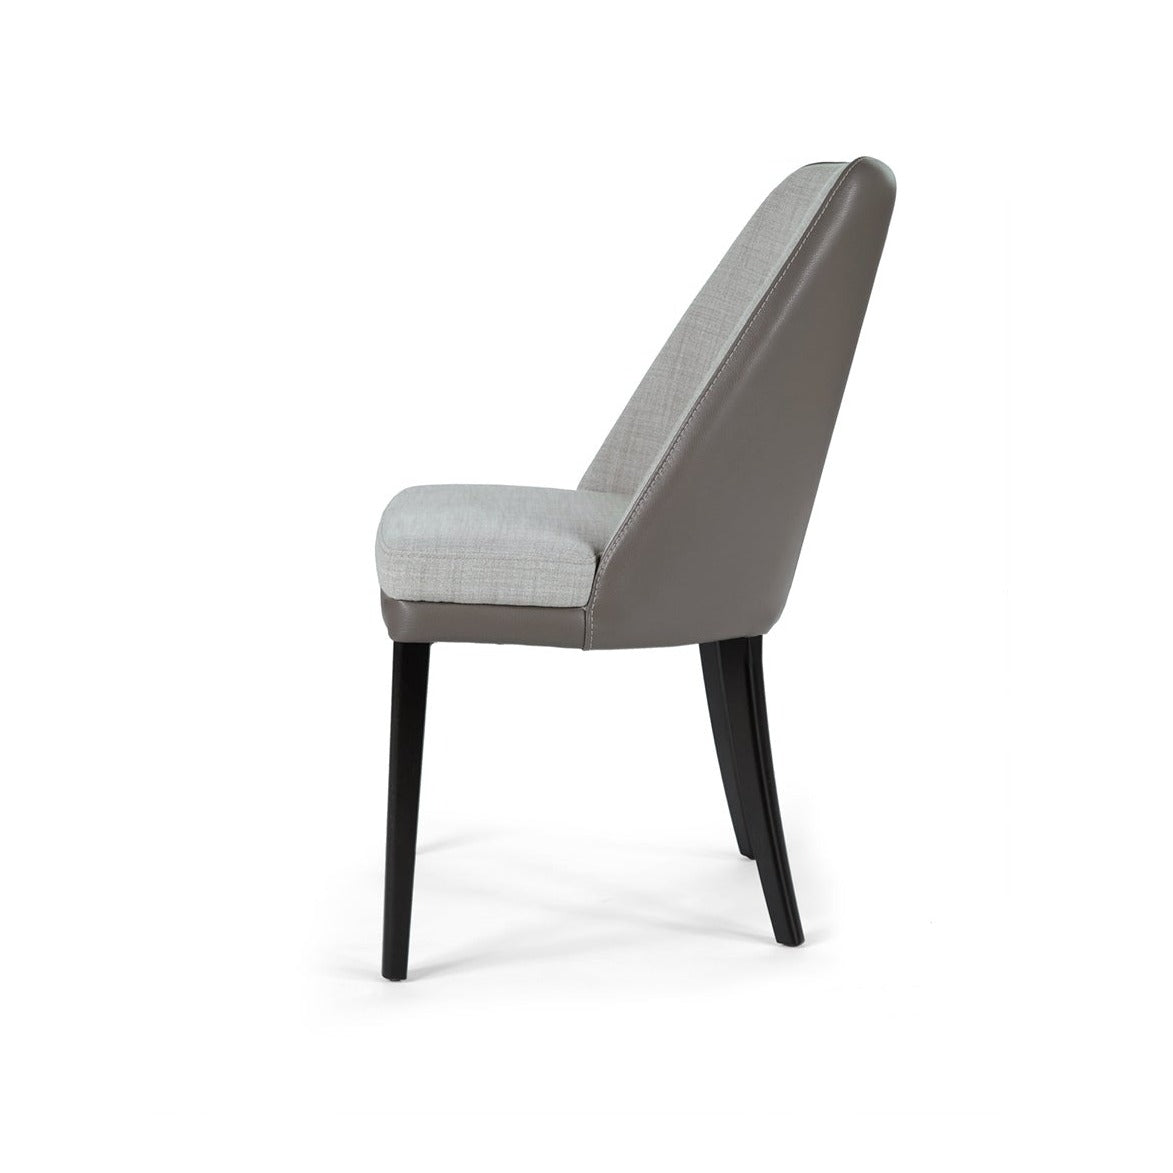 JULIE I Dining Chair by Borzalino